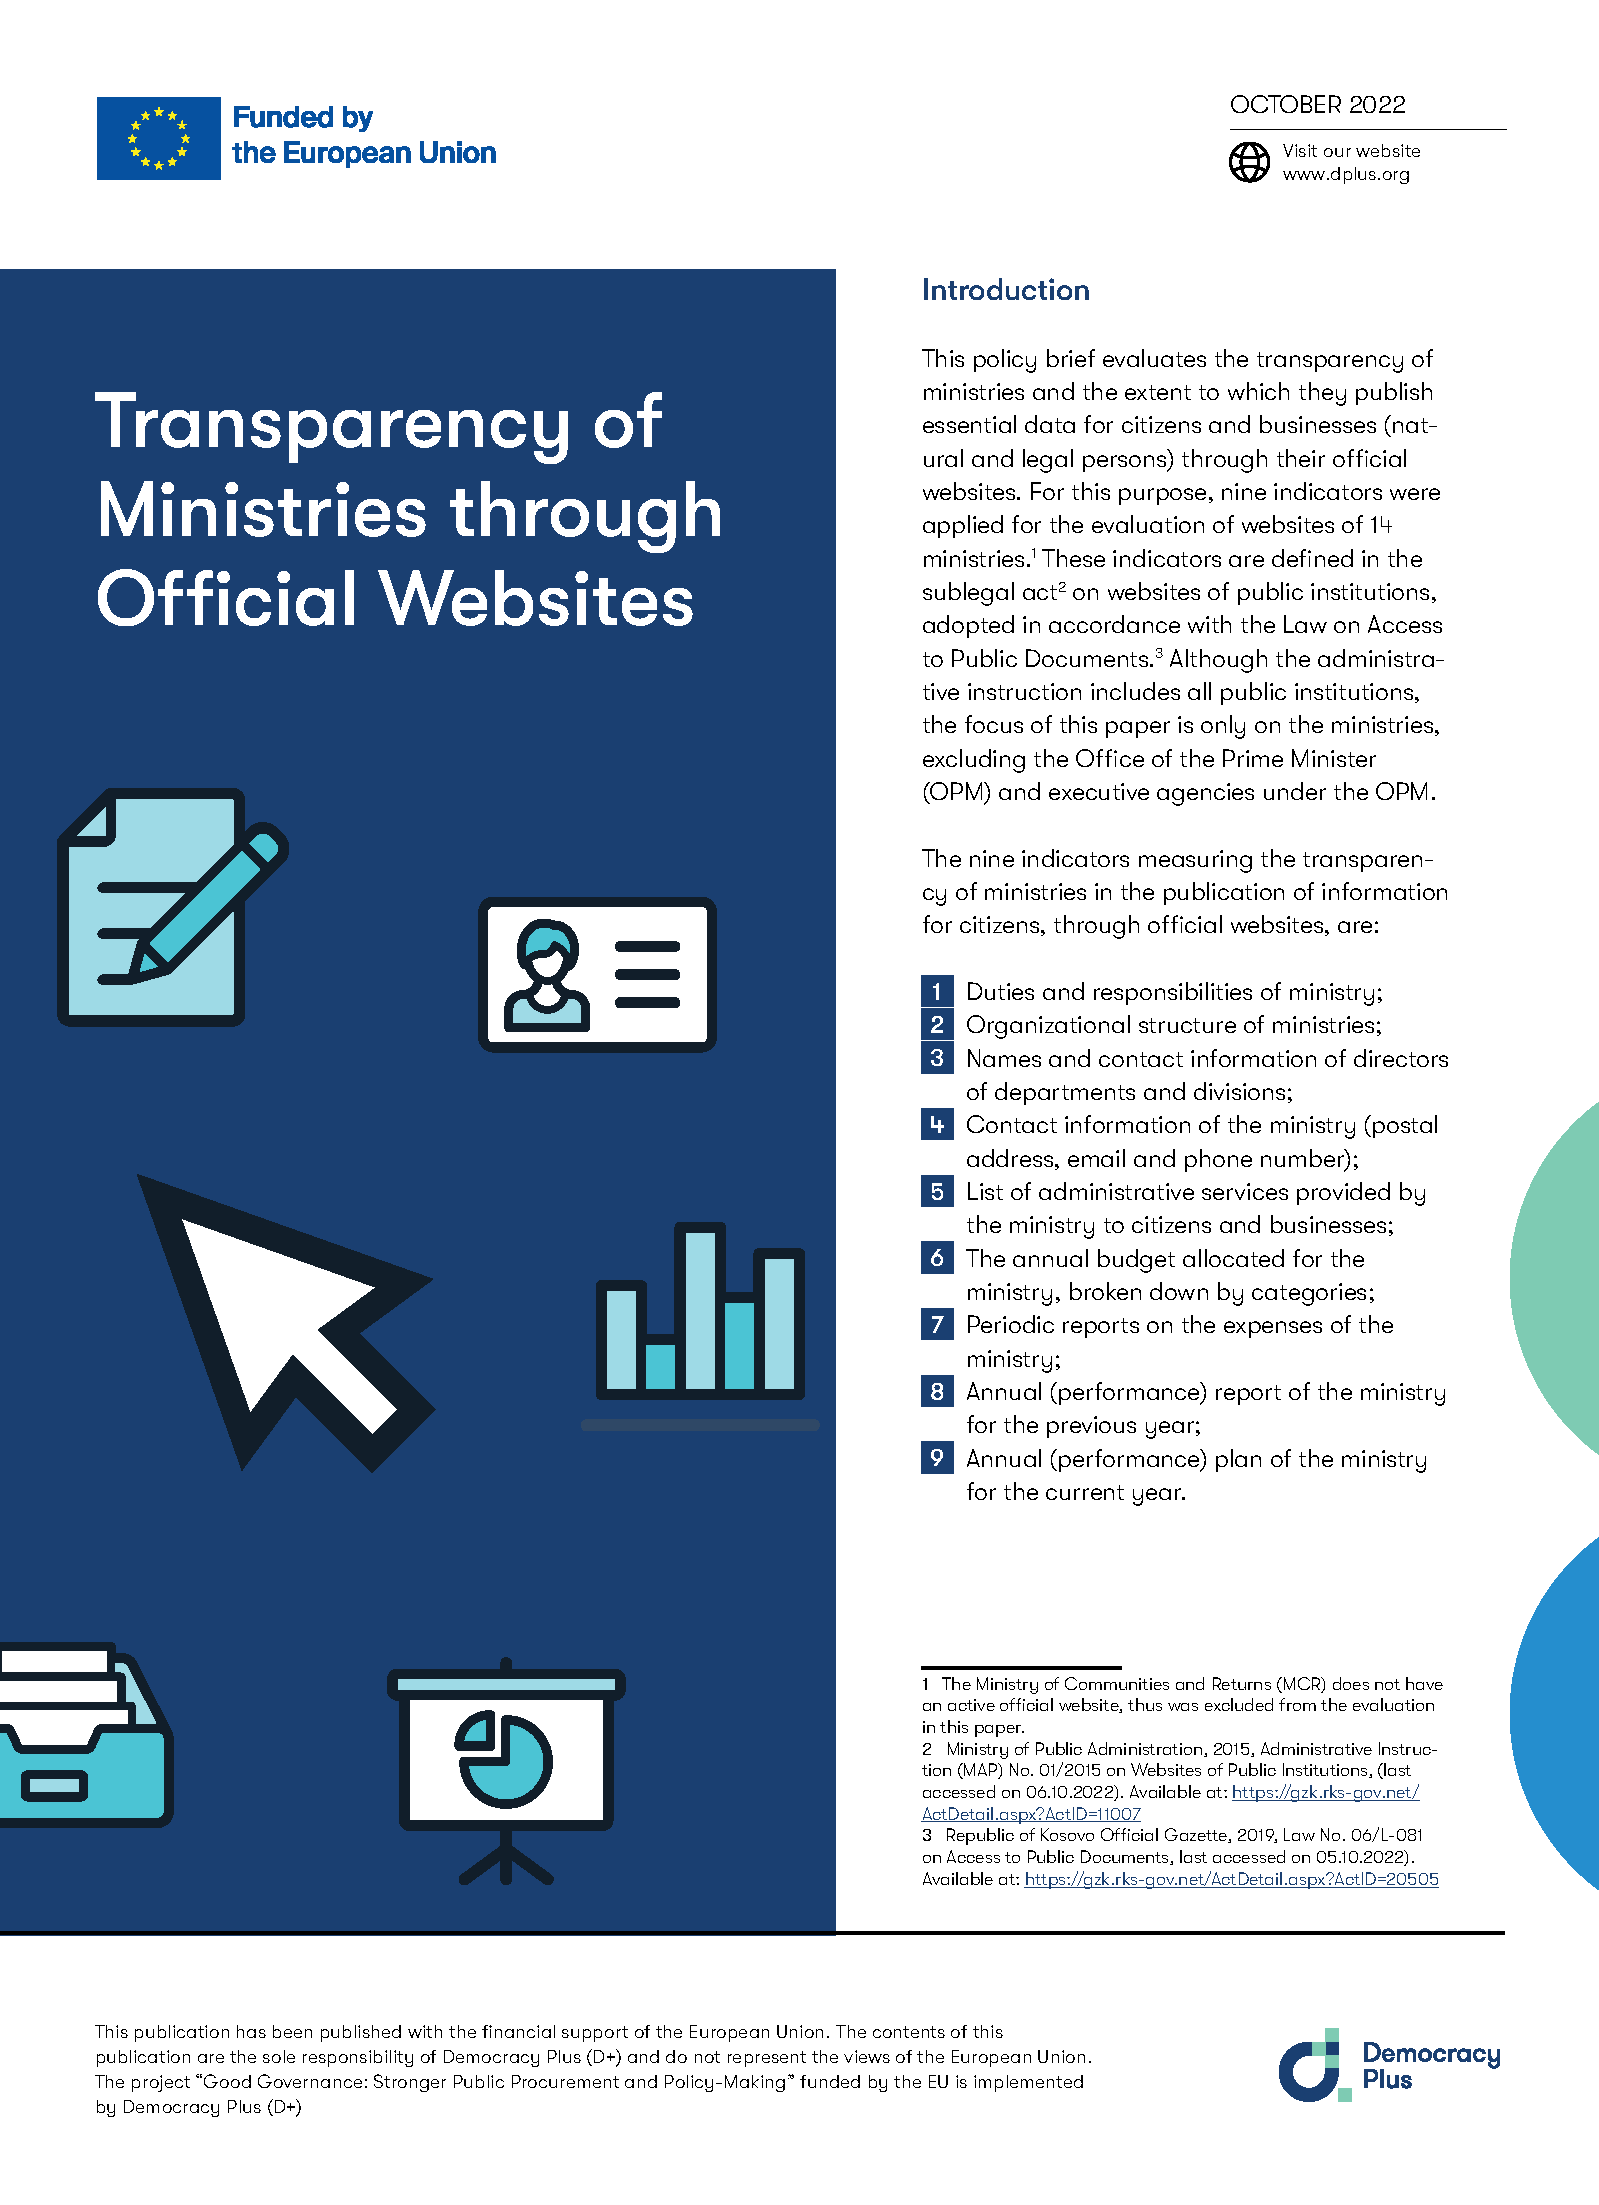 Transparency of Ministries through Official Websites